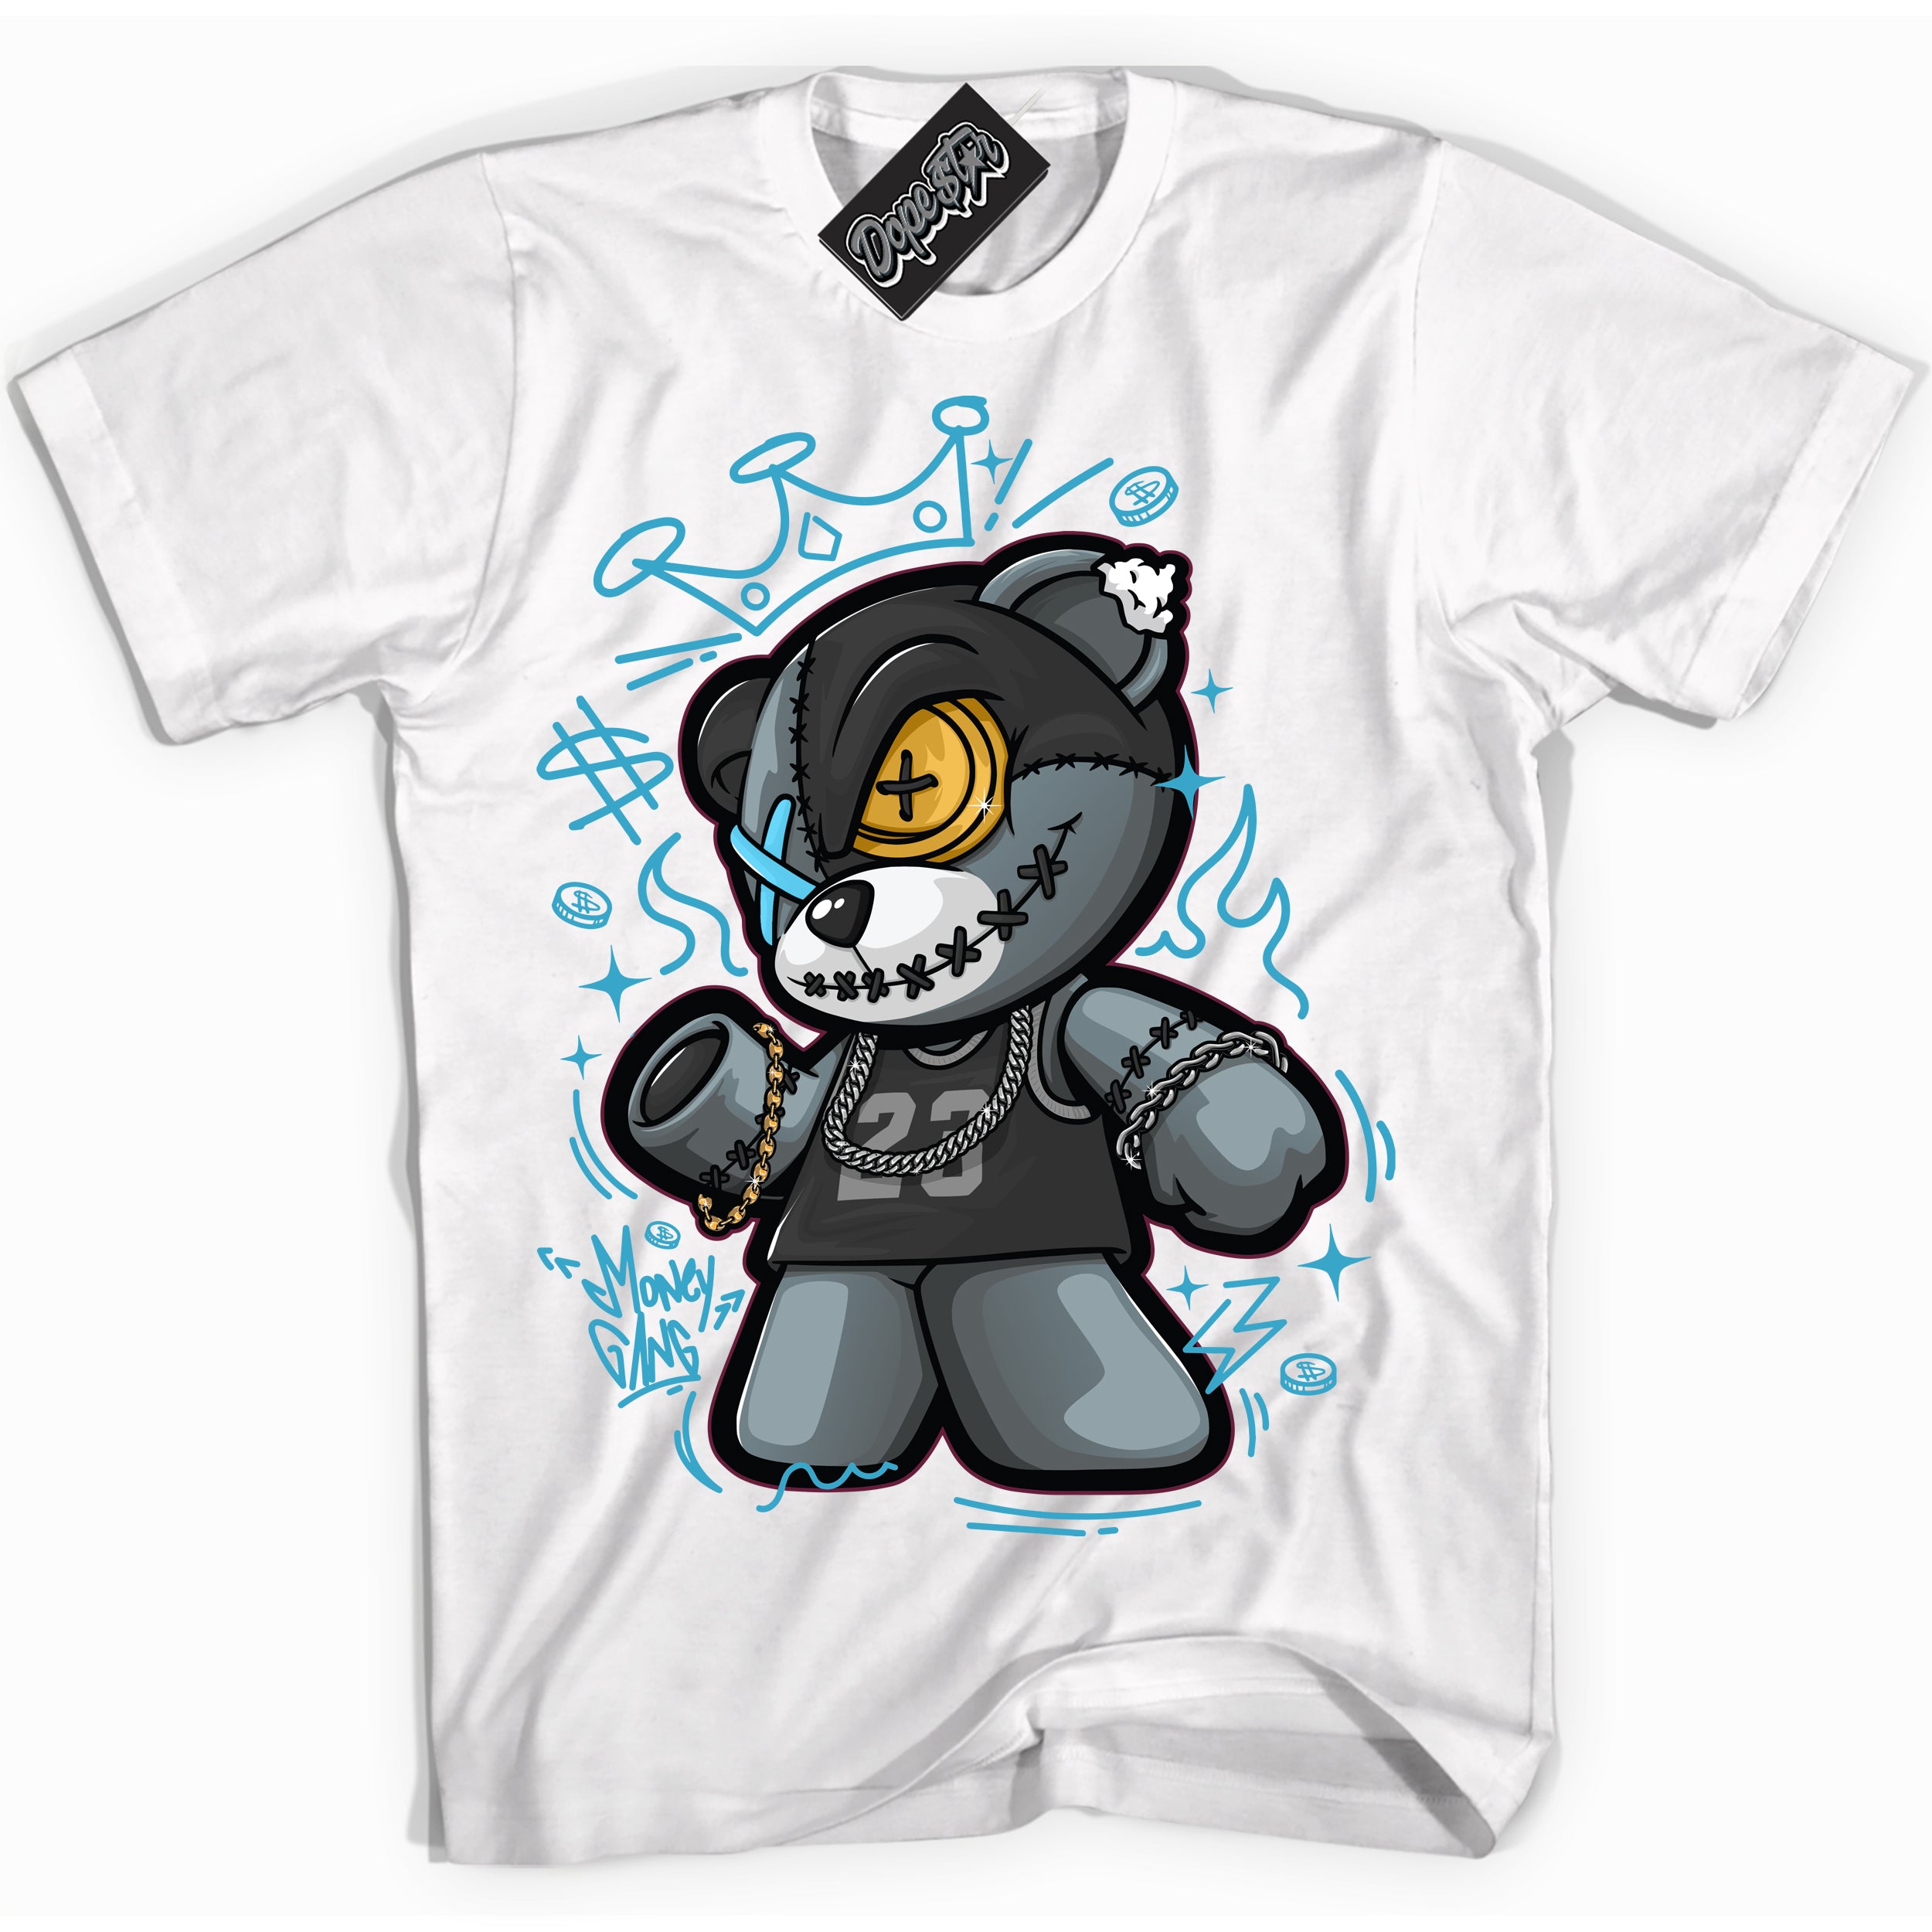 Cool White Shirt with “ Money Gang Bear” design that perfectly matches Aqua 5s Sneakers.